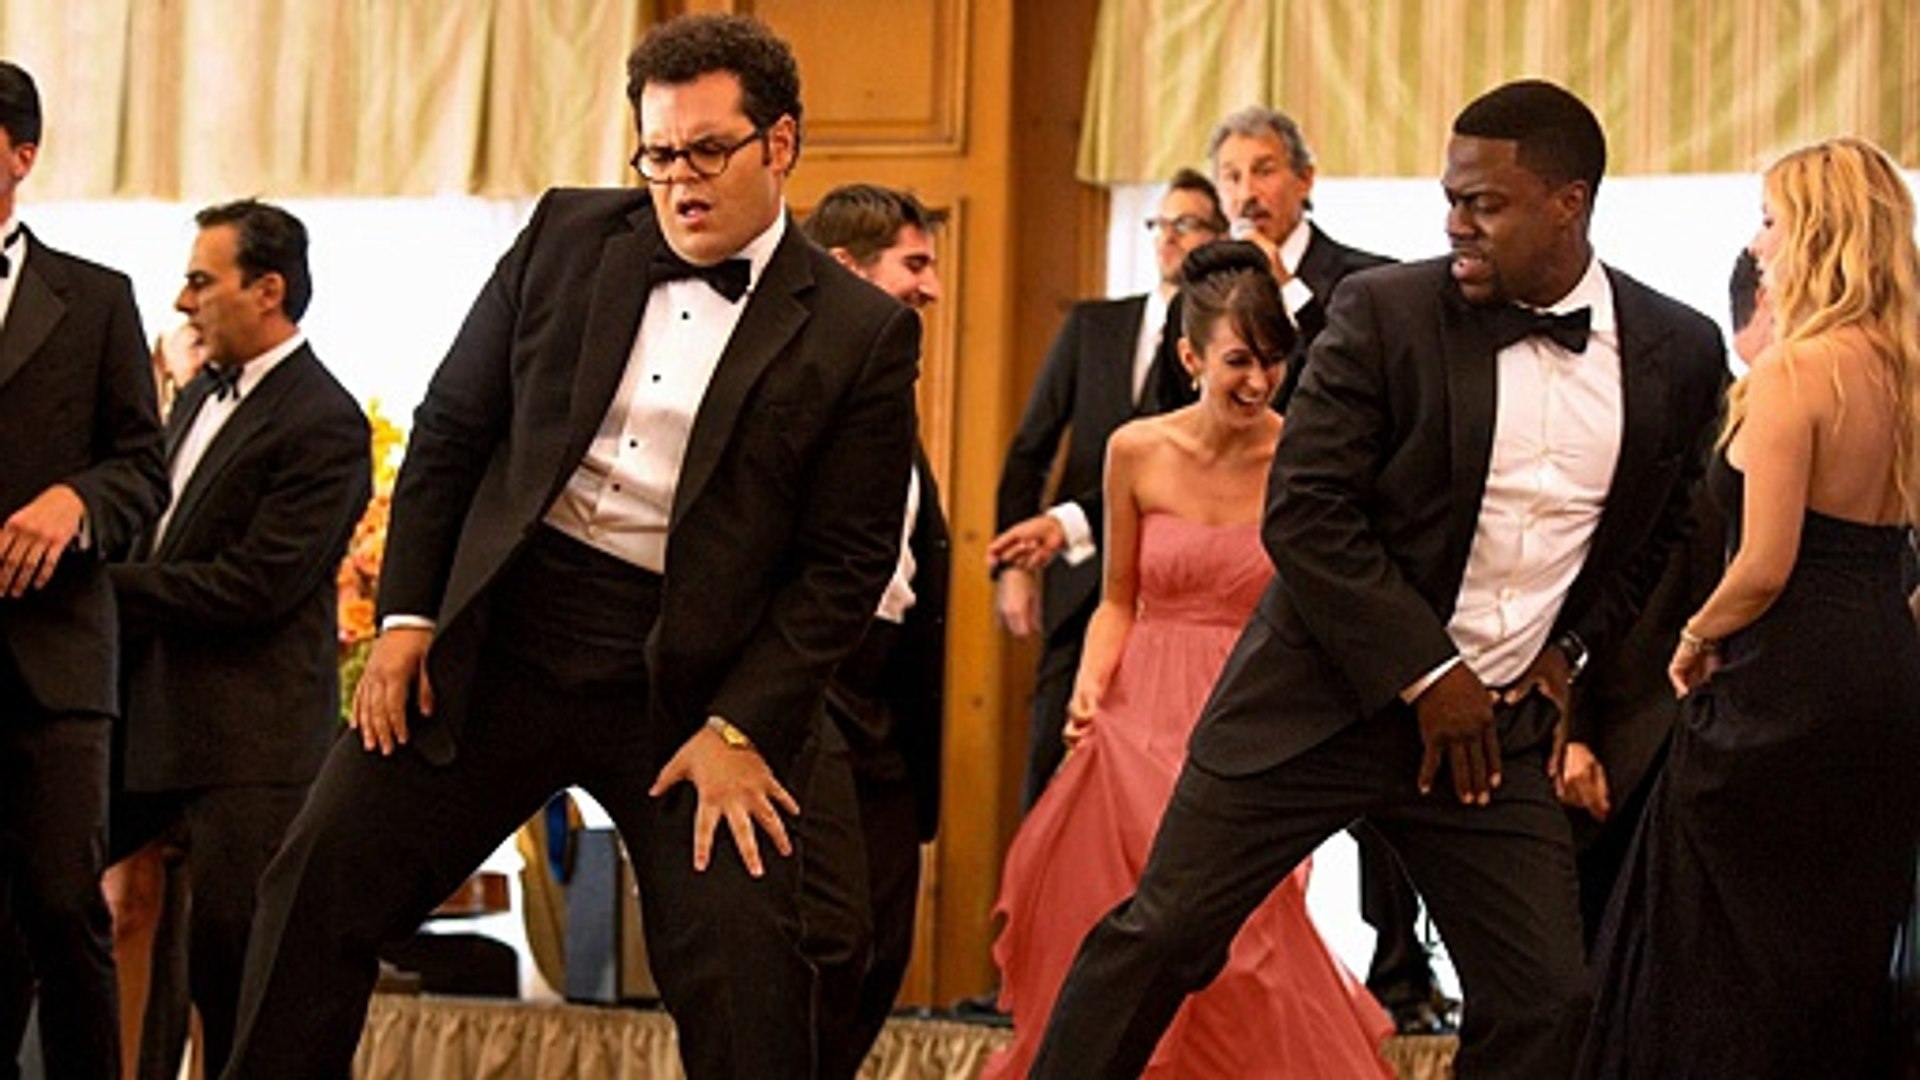 The Wedding Ringer (2015) - Kevin Hart, Kaley Cuoco Movie HD - video  Dailymotion